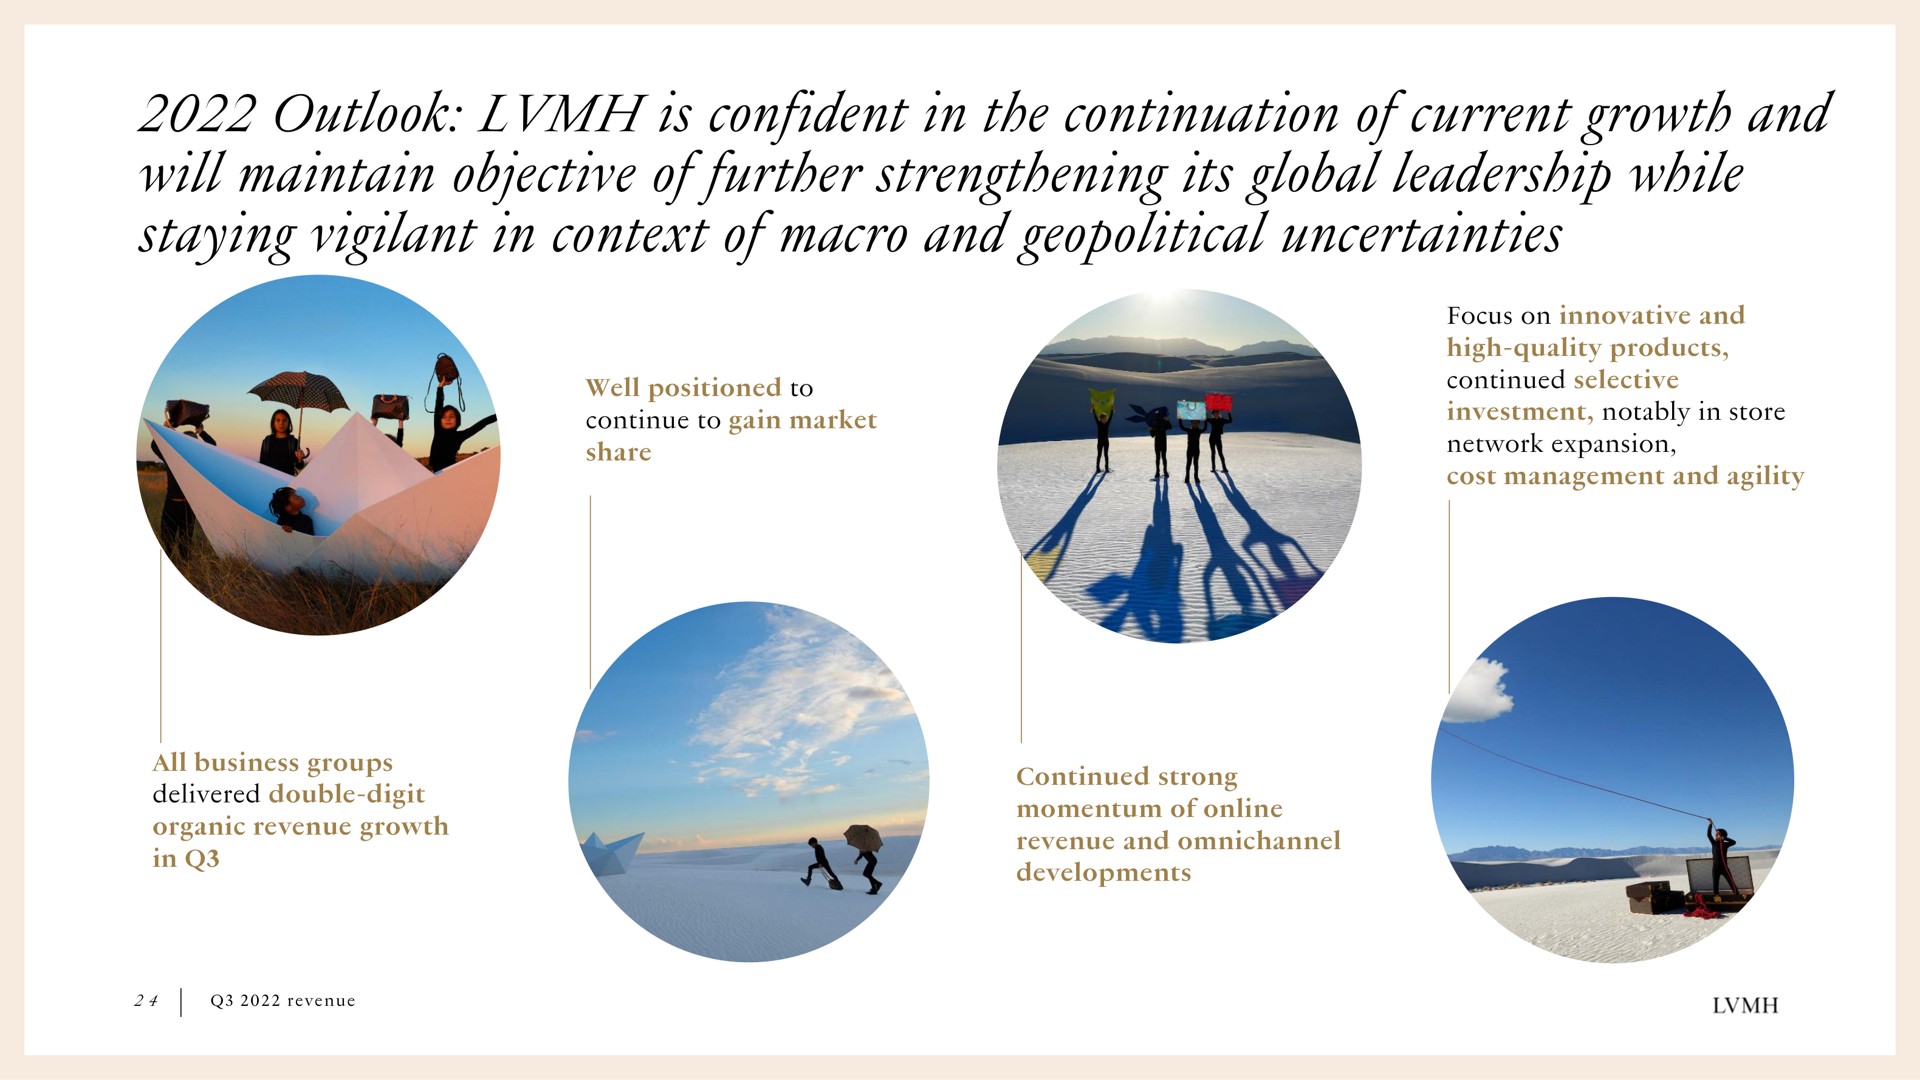 outlook is confident in the continuation of current growth and will maintain objective of further strengthening its global leadership while staying vigilant in context of macro and geopolitical uncertainties | LVMH